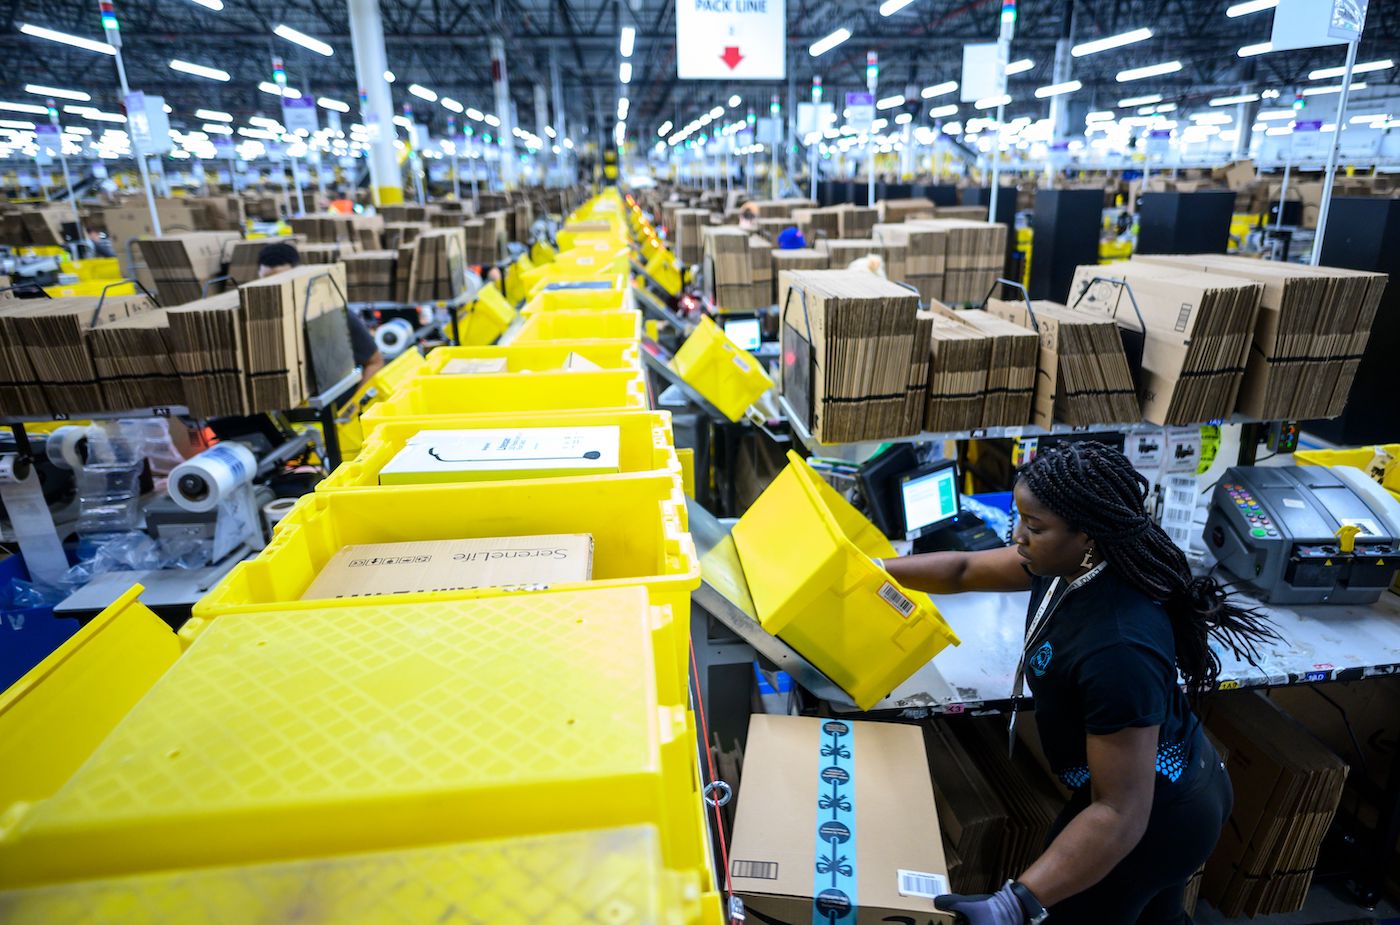 A woman works at a packing station at the 855,000-square-foot Amazon fulfillment center in Staten Island, one of the five boroughs of New York City, on February 5, 2019. - Inside a huge warehouse on Staten Island thousands of robots are busy distributing thousands of items sold by the giant of online sales, Amazon. (Photo by Johannes EISELE / AFP) (Photo credit should read JOHANNES EISELE/AFP via Getty Images)